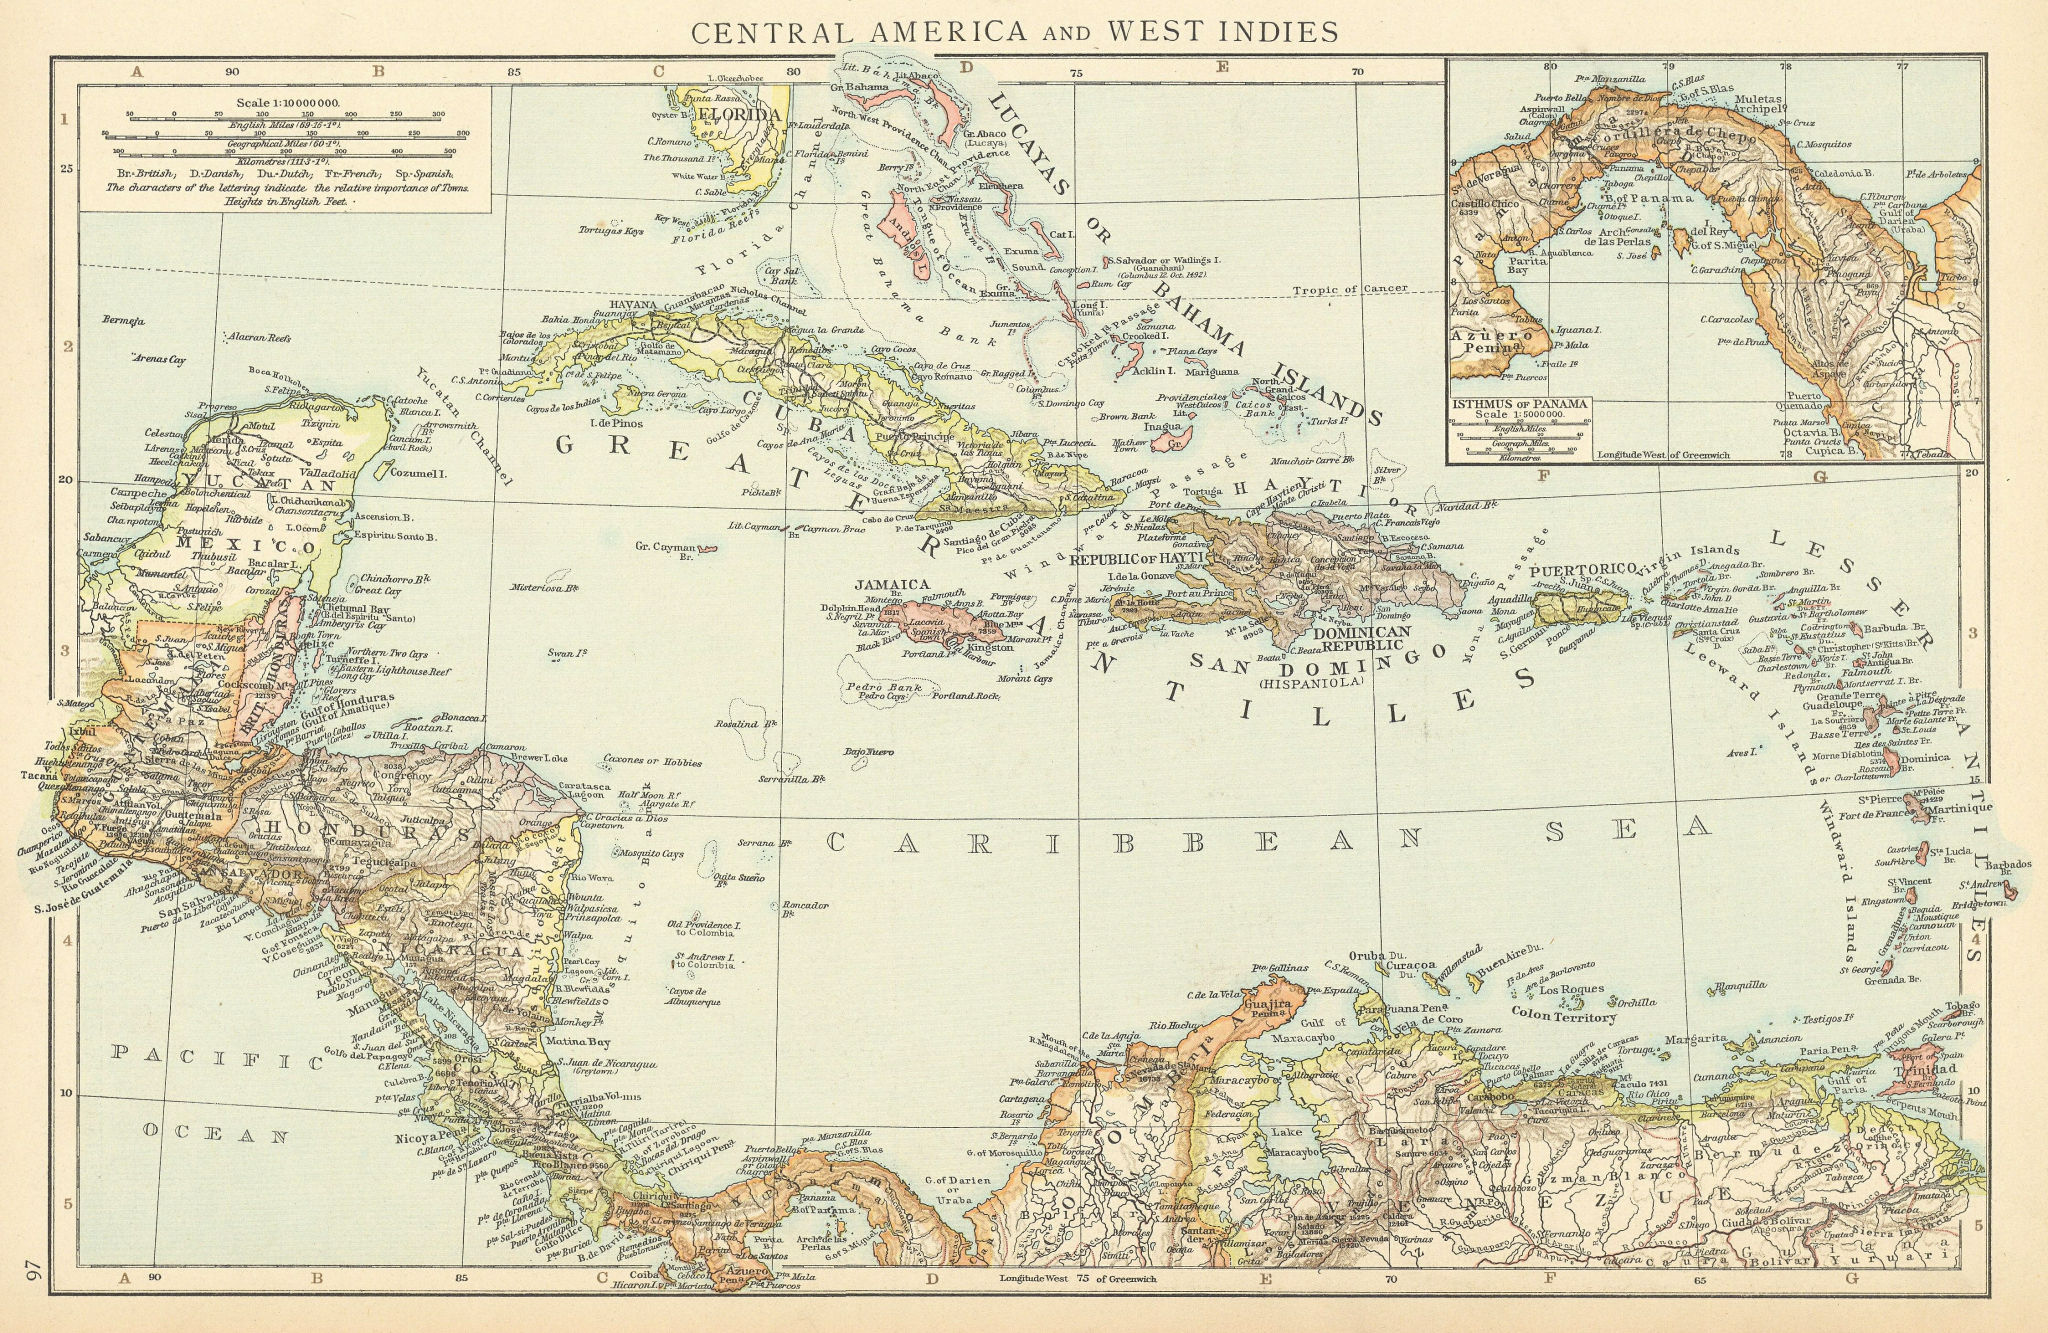 Associate Product Central America & West Indies. Caribbean. Panama. TIMES 1895 old antique map